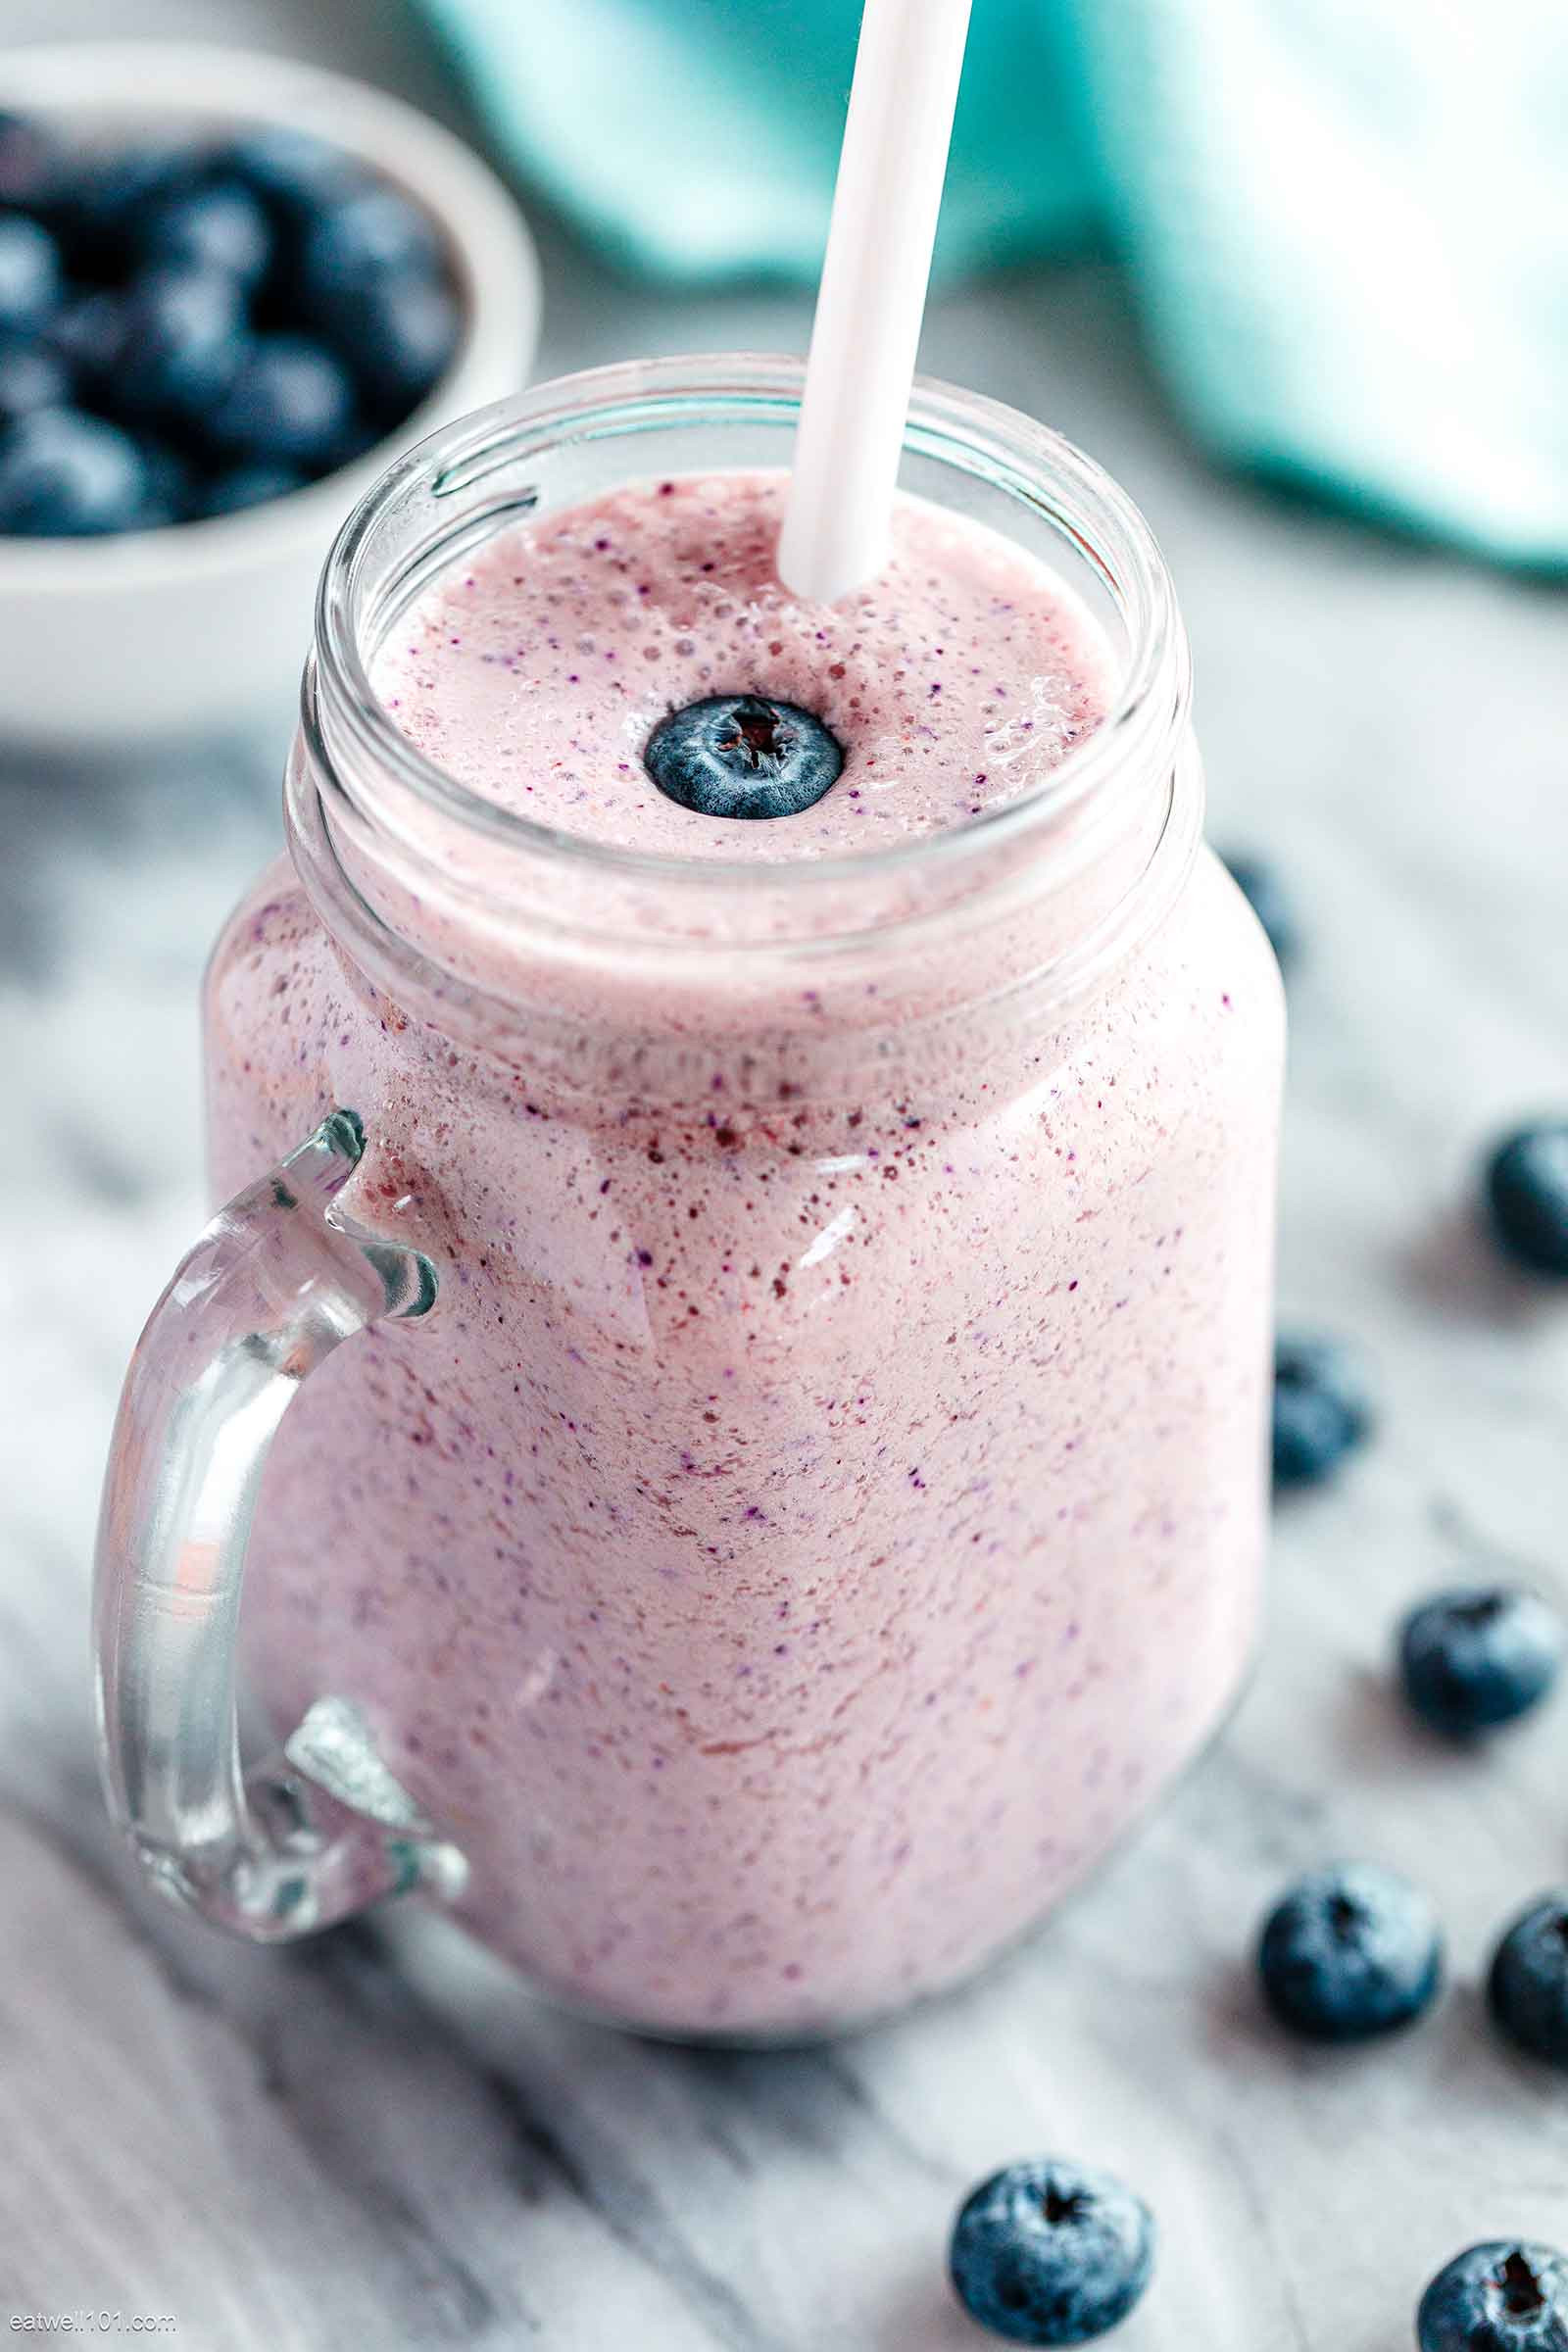 Dairy Free Smoothies New Dairy Free Blueberry Coconut Milk Smoothie – Dairy Free